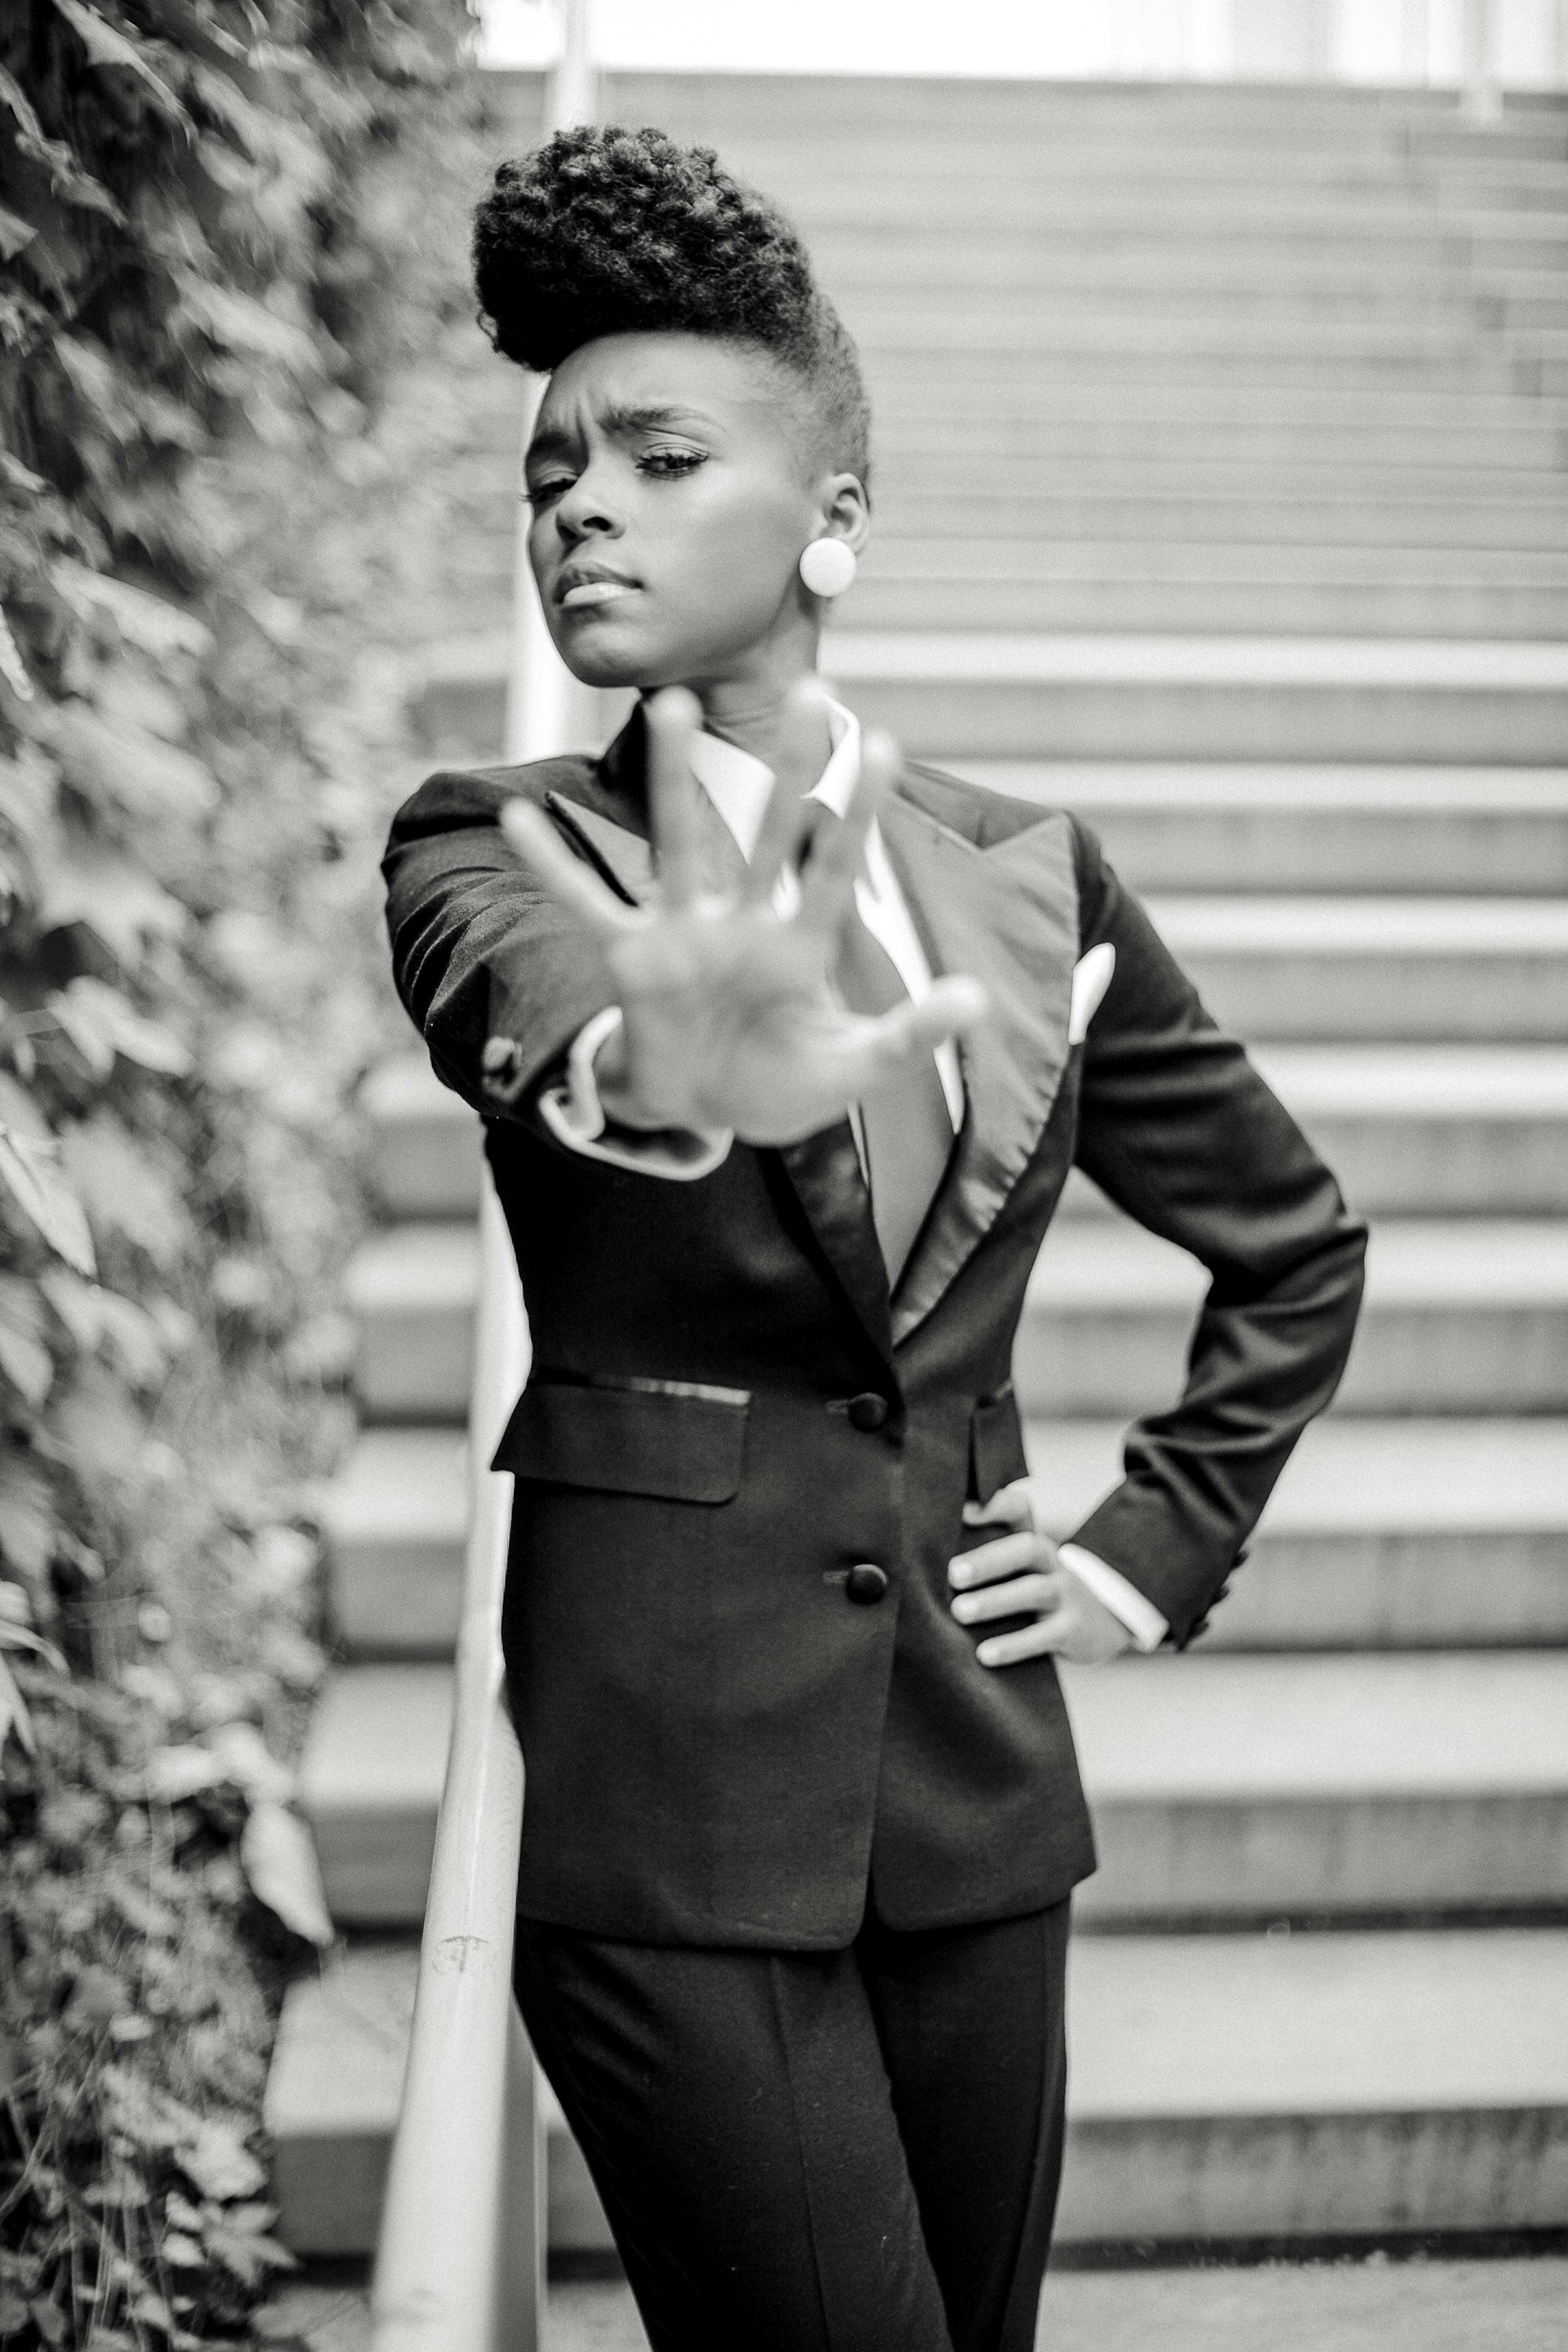 Aaron Smith, Musician Janelle Monáe, 2009; from Dandy Lion (